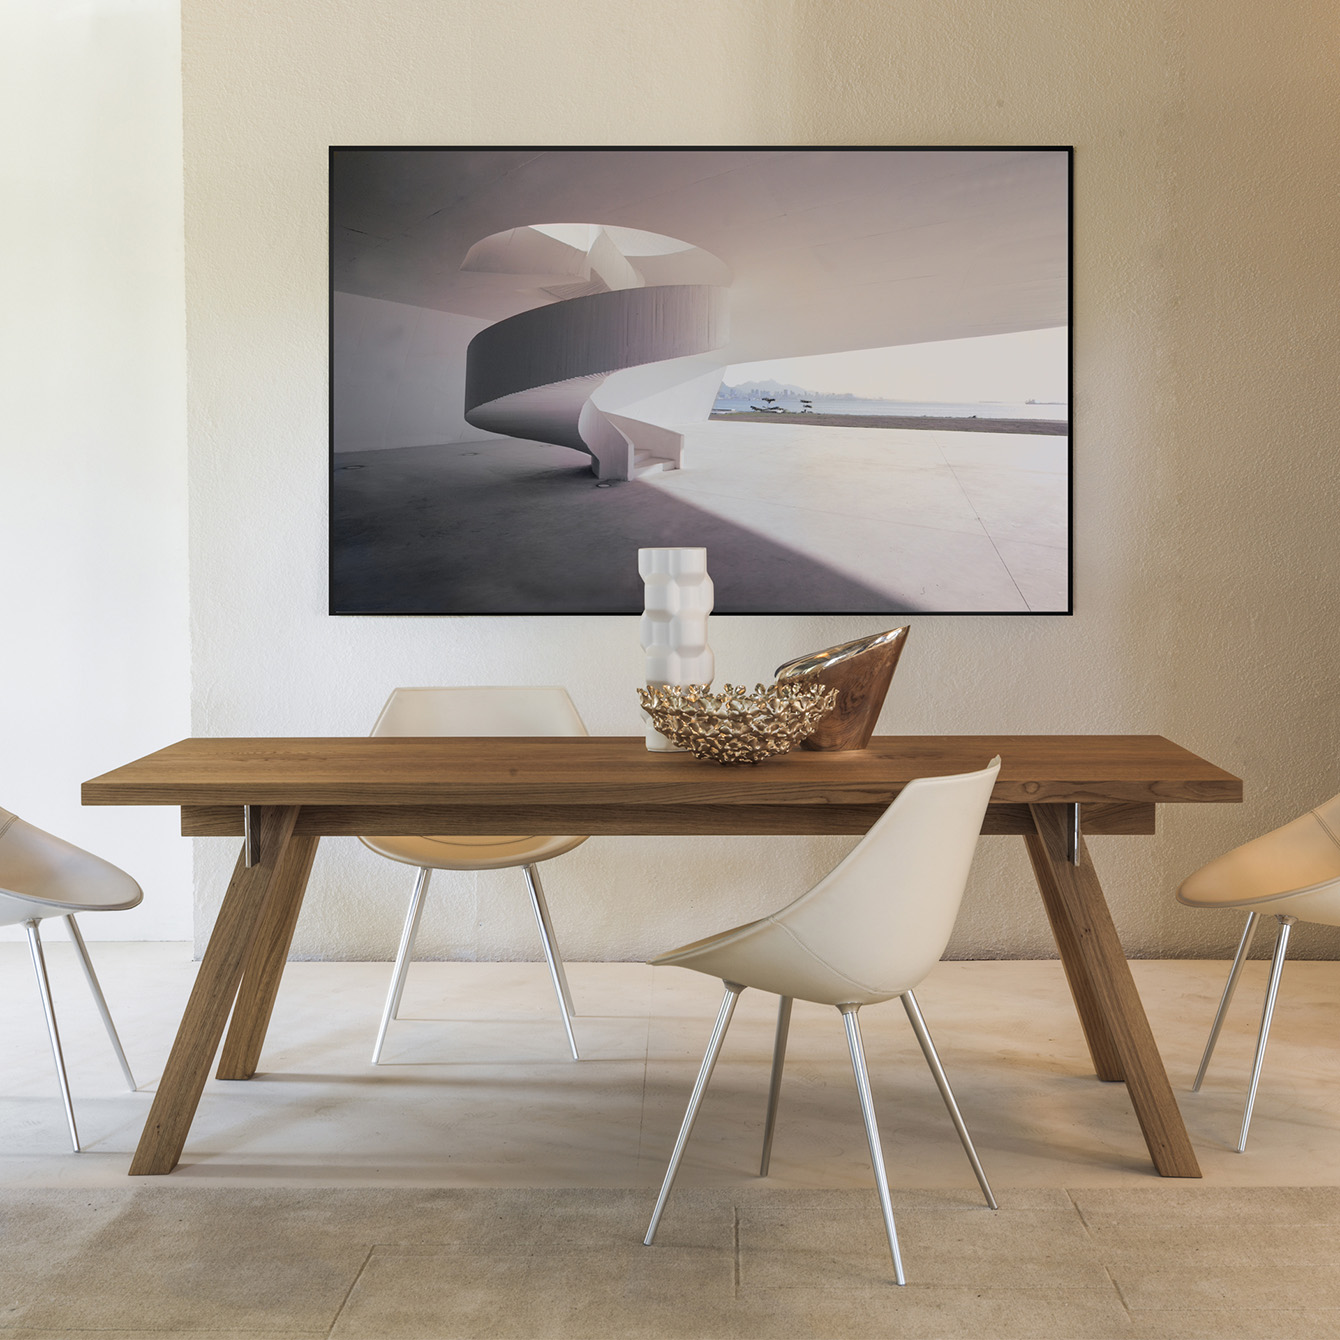 Wood dining table with modern chair, rug and artwork